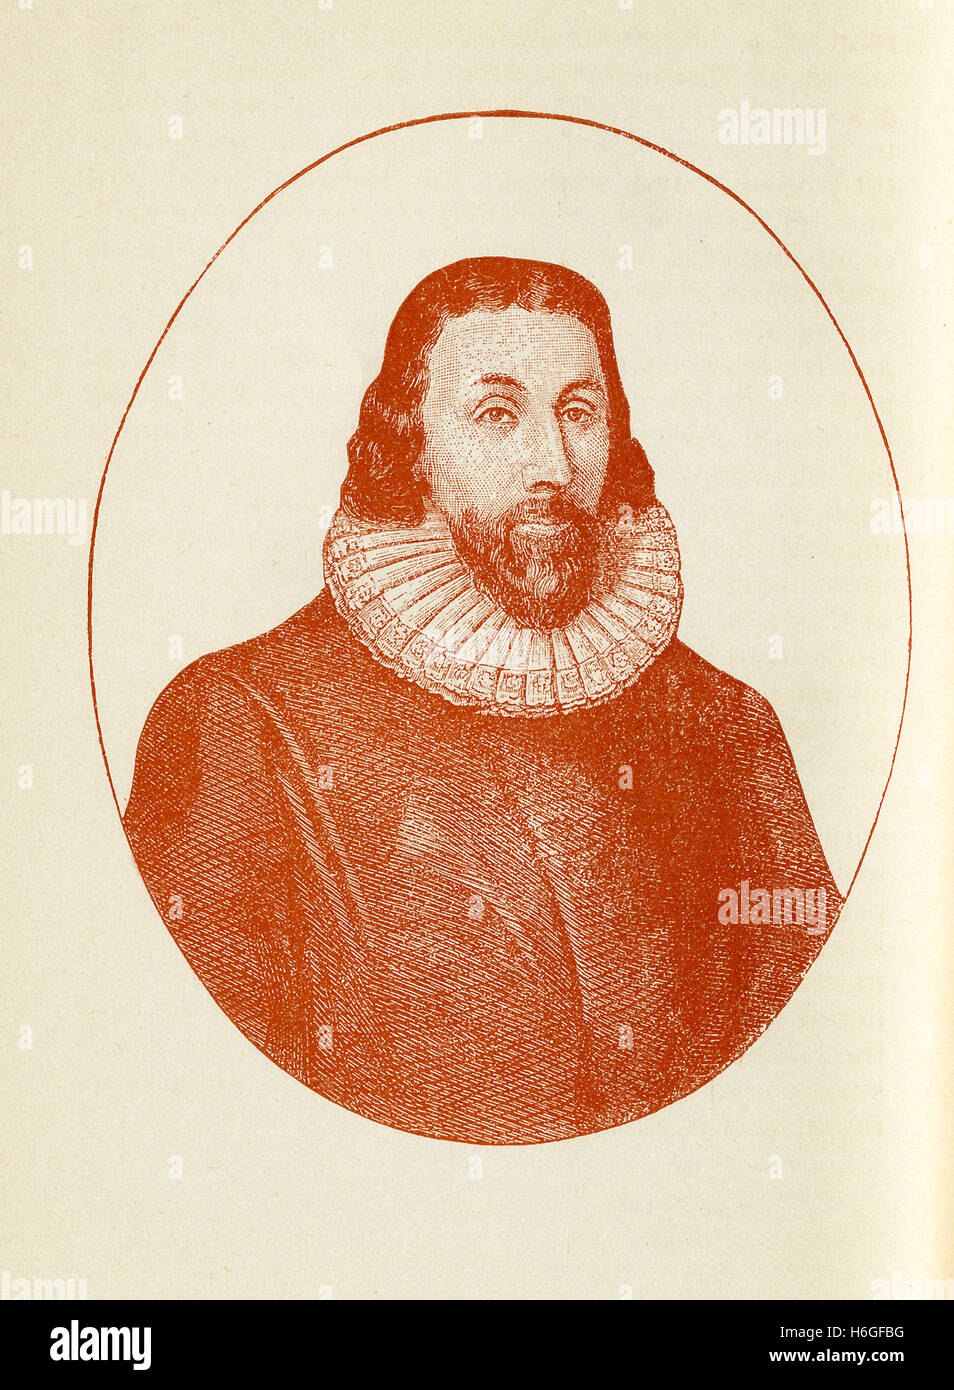 John Winthrop (1588-1649) was governor of the Massachusetts Bay Colony. He helped the theocratic policy of the colony and opposed Anne Hutchinson. This illustration accompanied the novel Twice Told Tales (copy published about 1895) that was written by the American novelist Nathaniel Hawthorne (1804-1864). Stock Photo